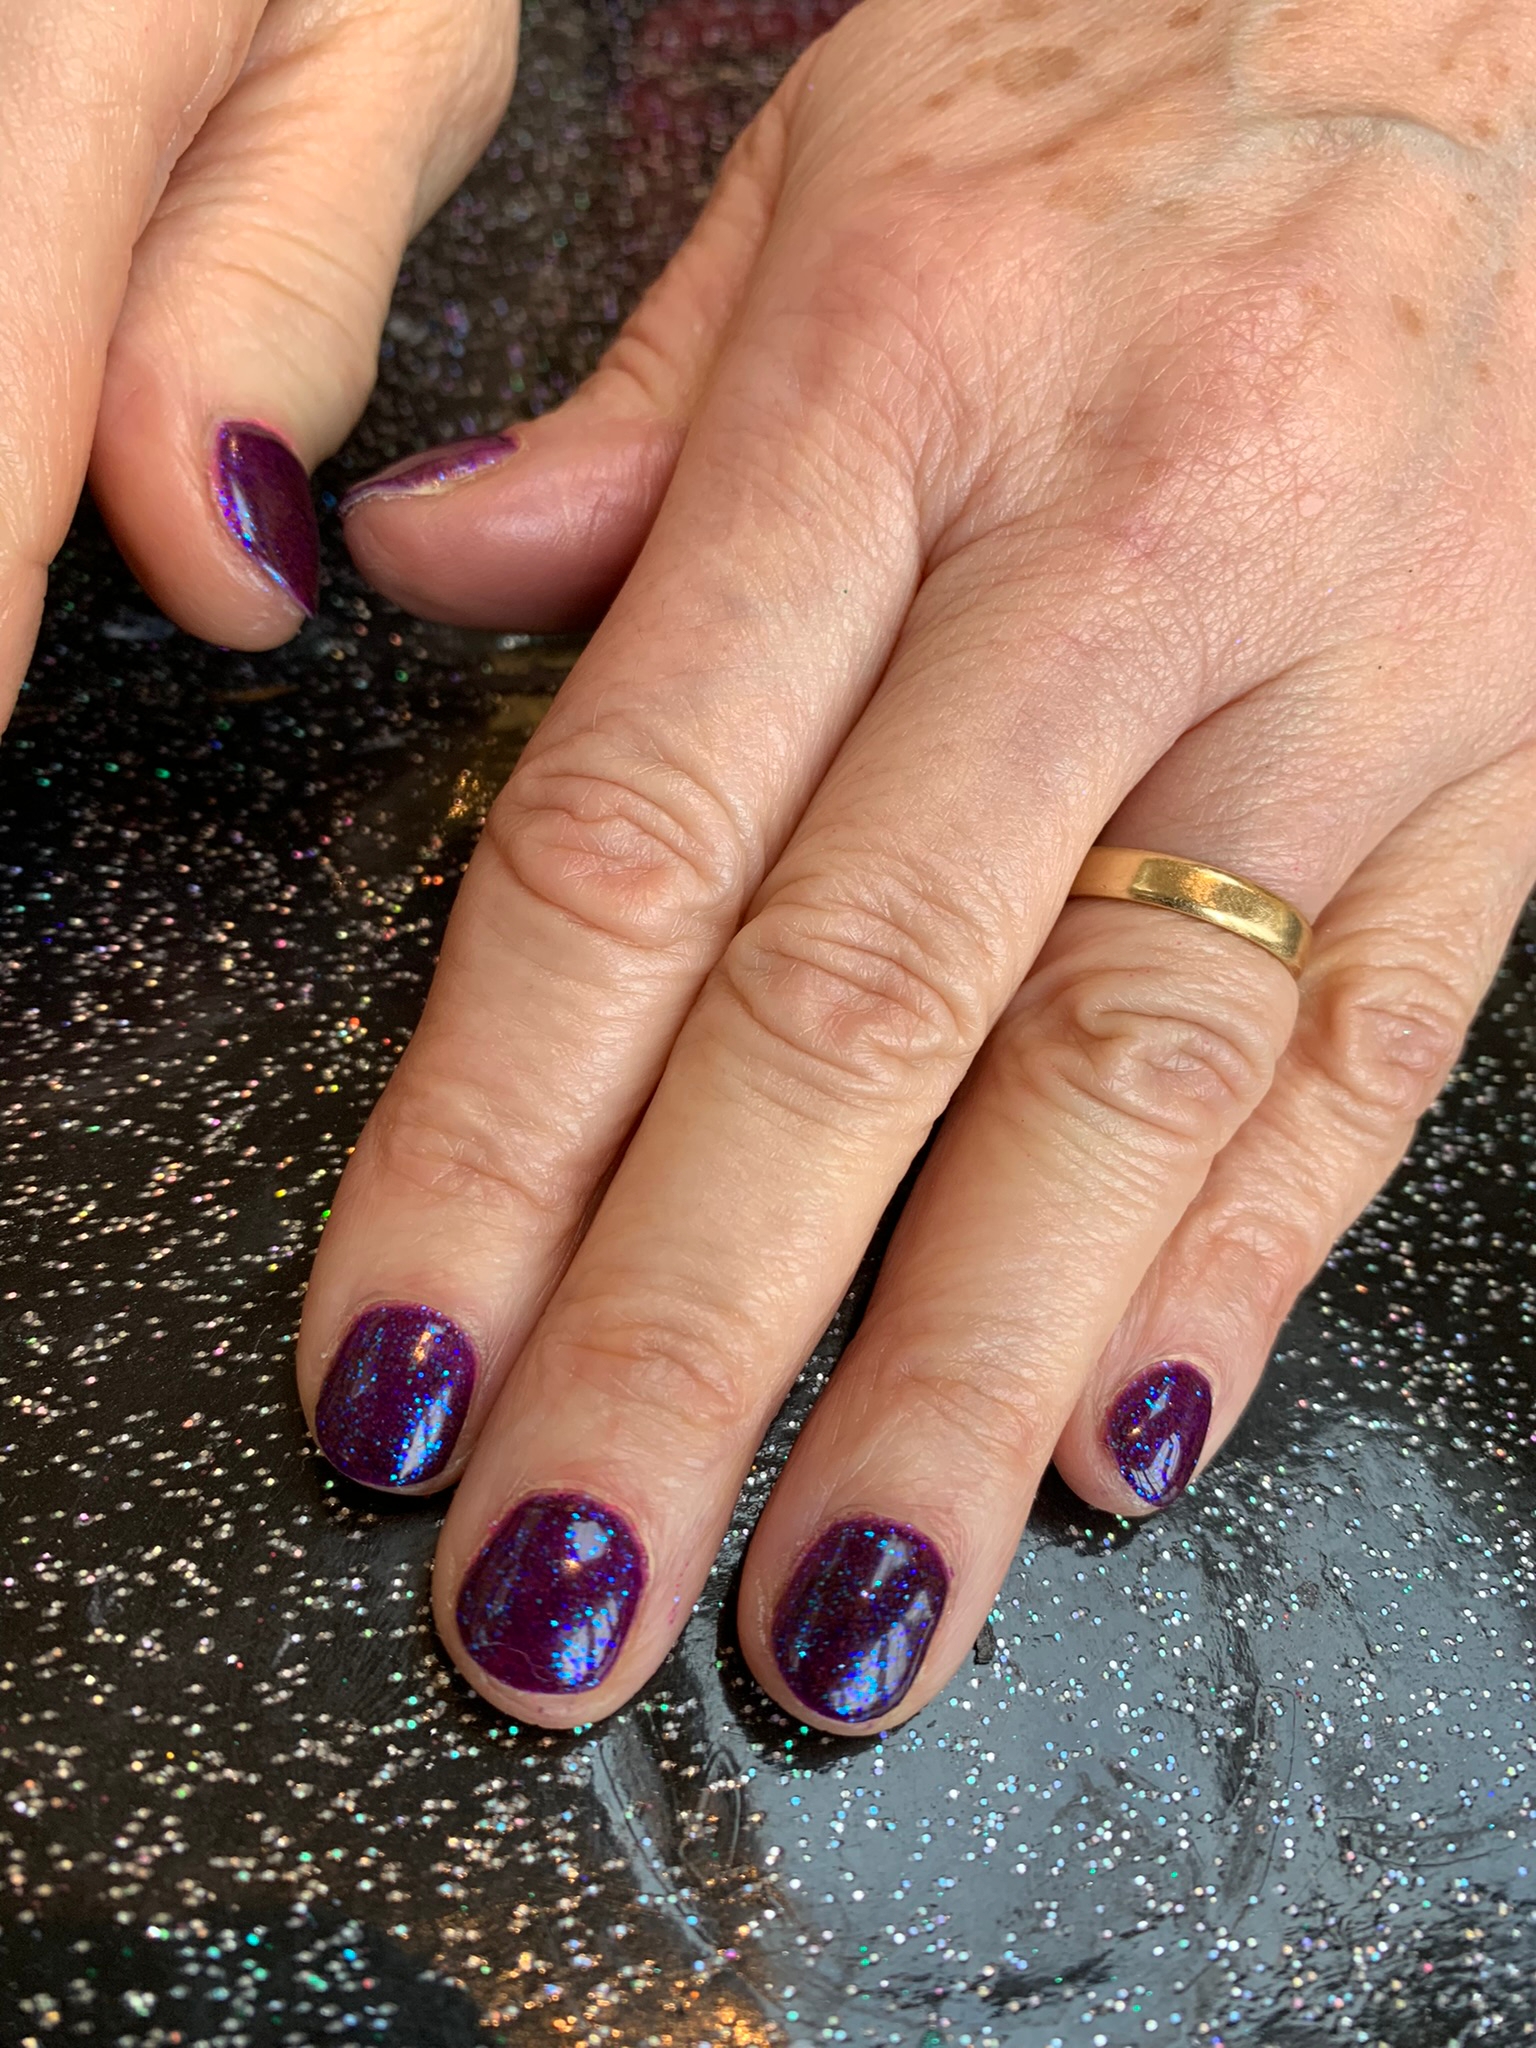 Happy 2023 New sparkly holographic purple, this goes super blingy when the light shines on it nails by natalie rose mobile manicure and pedicure london